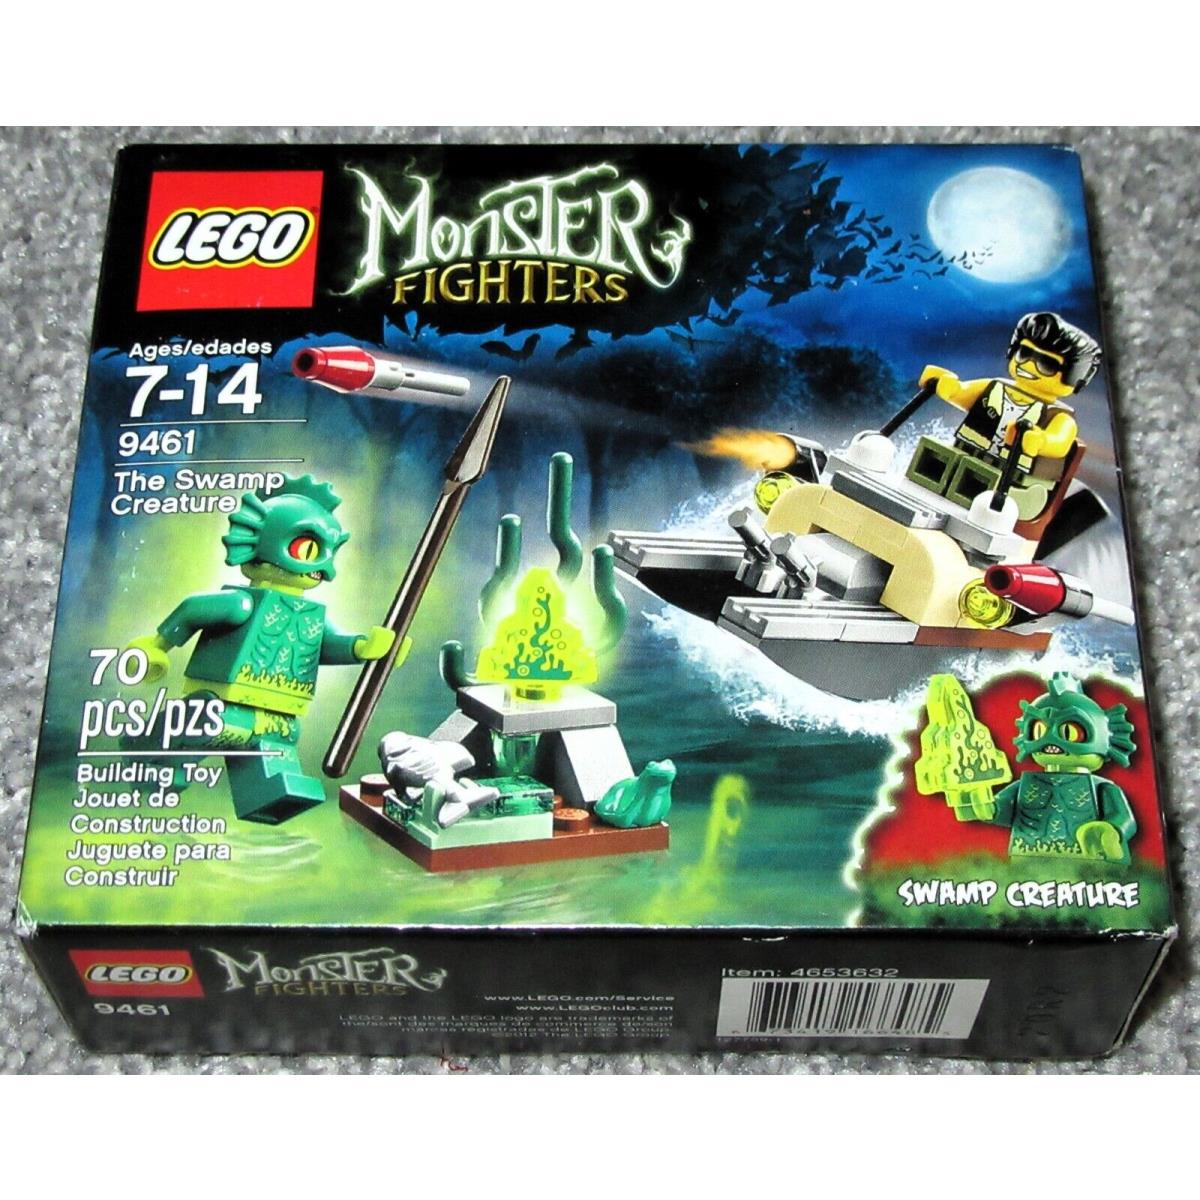 Lego Monster Fighters 9461 The Swamp Creature Nisb Moonstone Swamp Boat